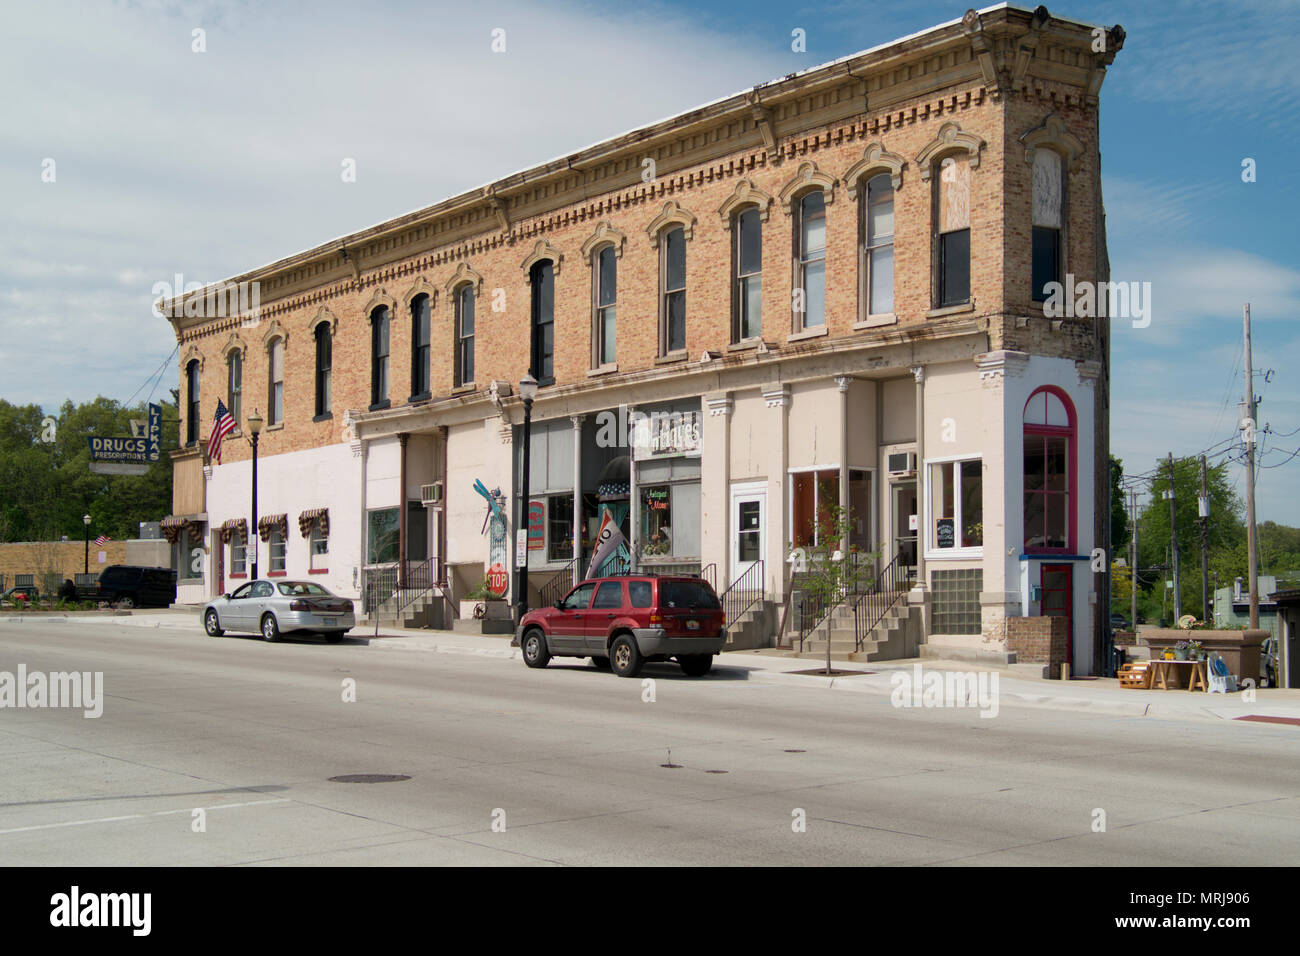 The Lipka Building in downtown Montague, Michigan. Stock Photo